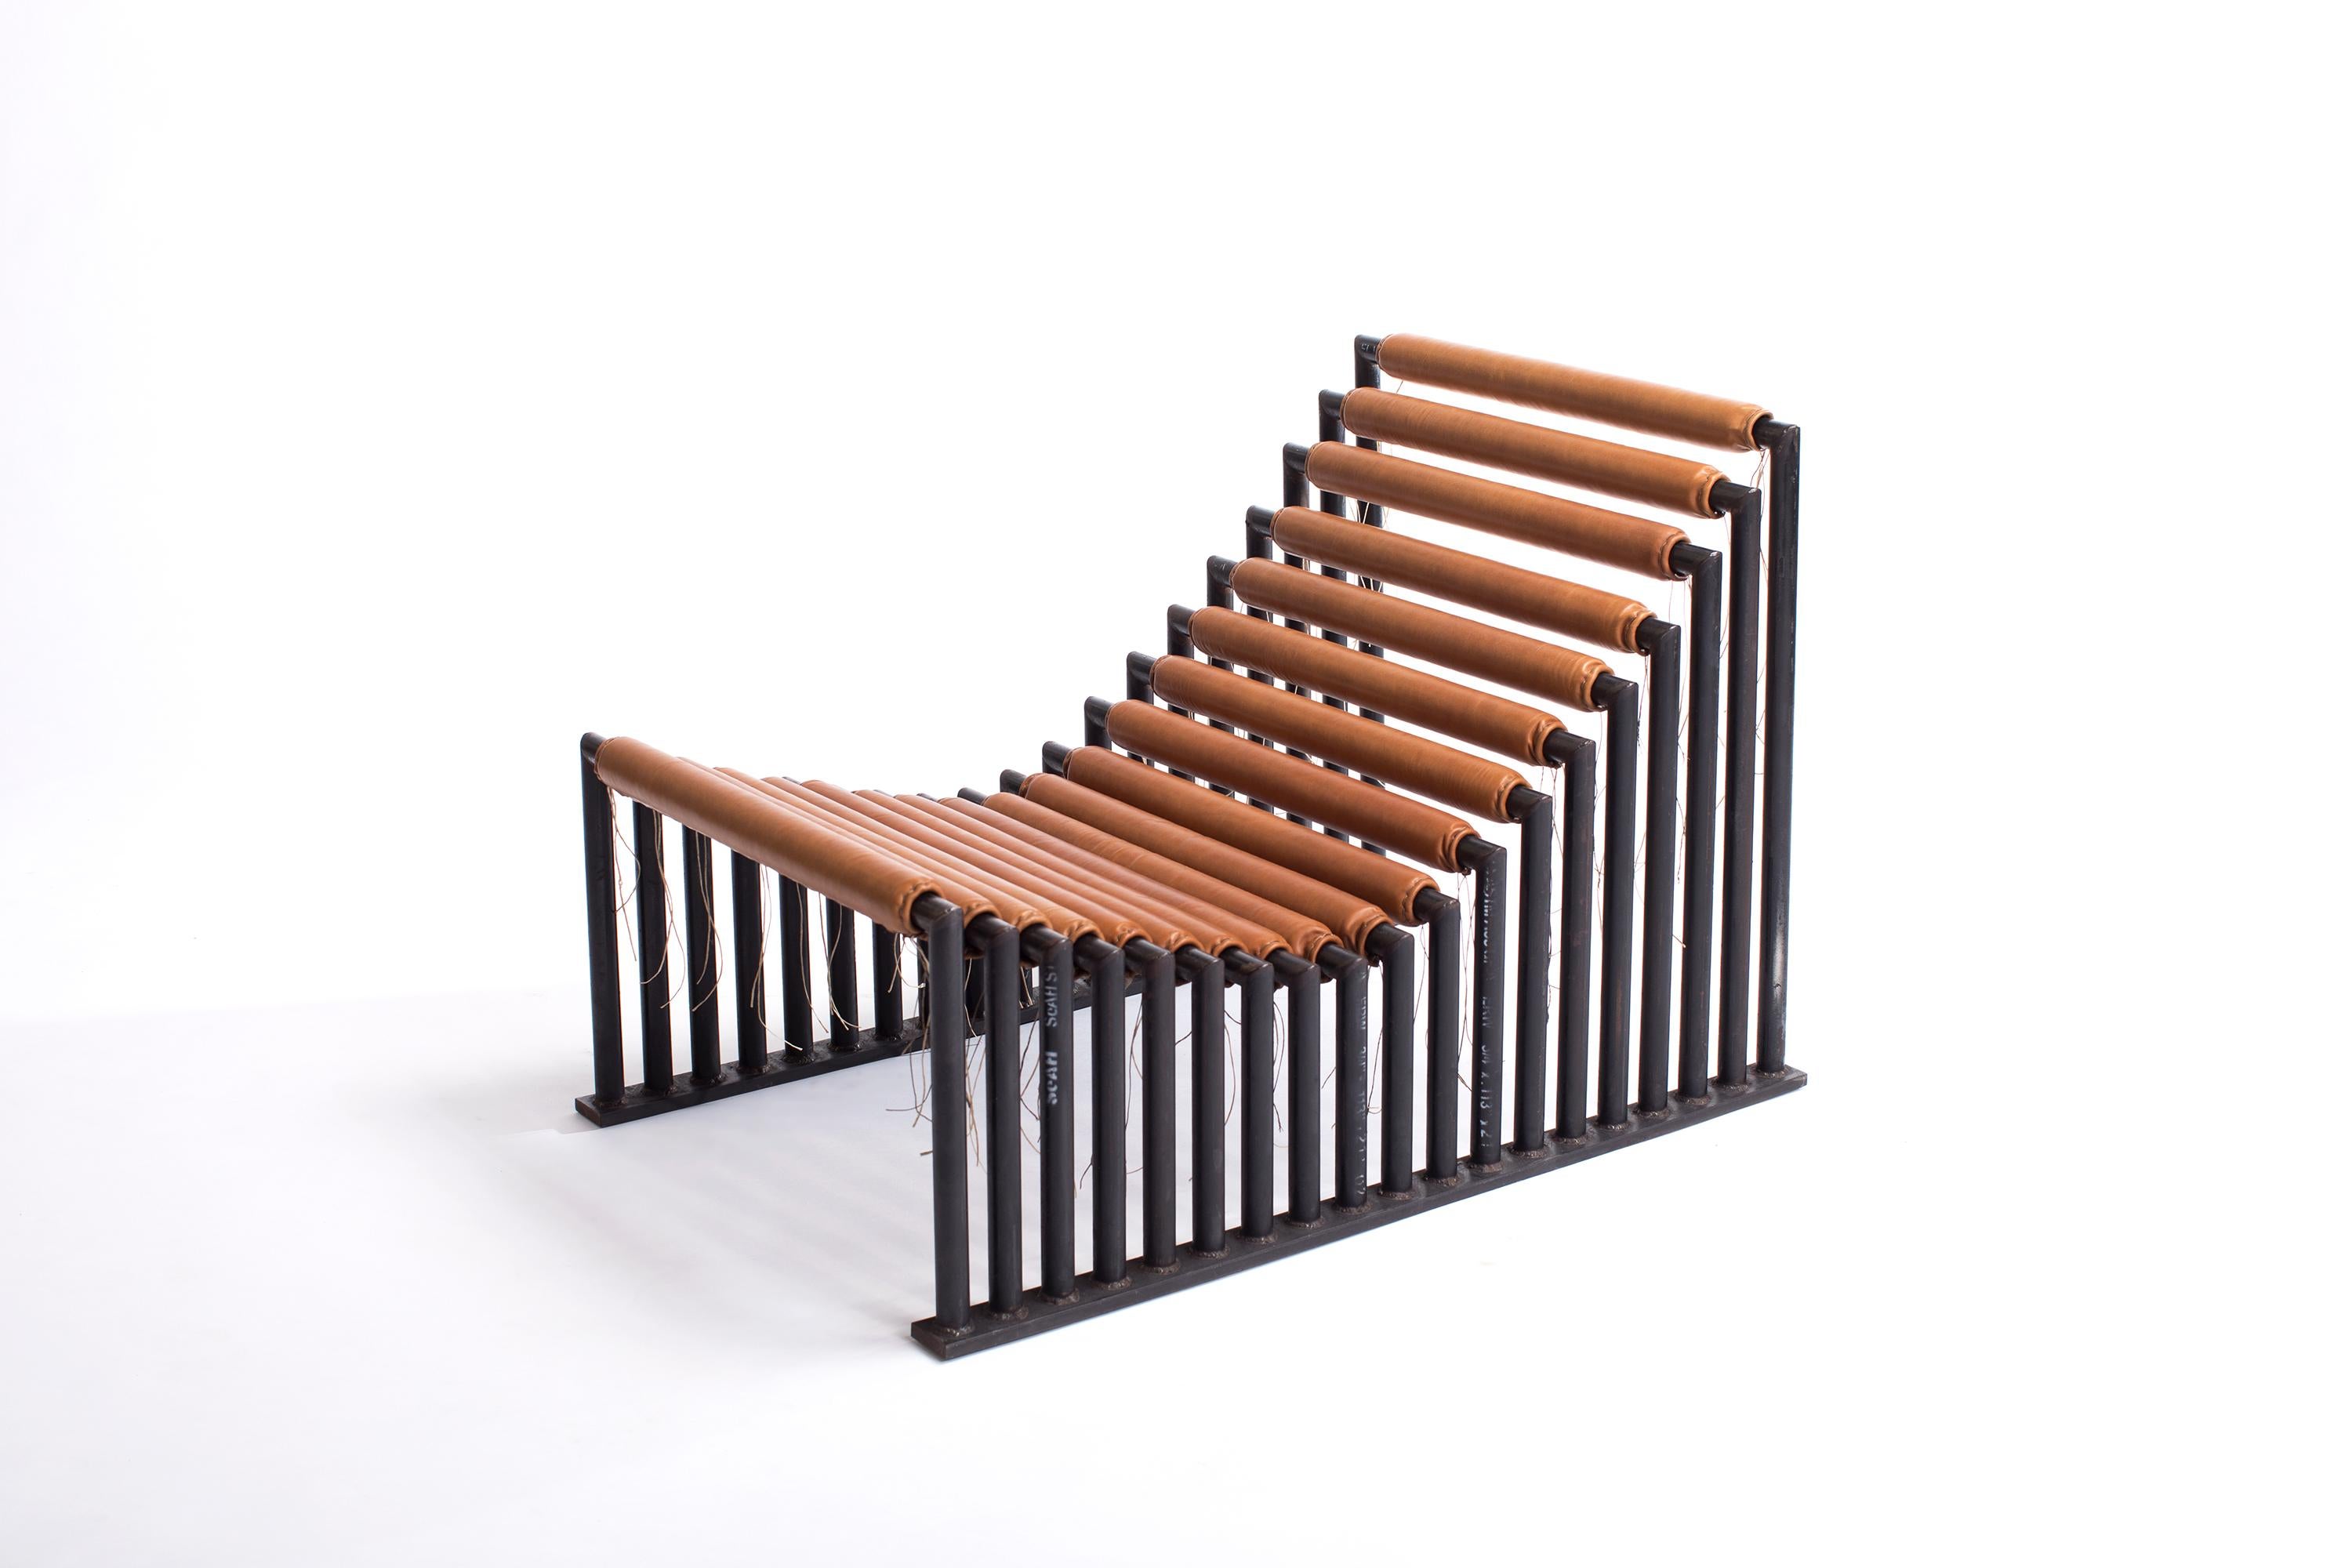 Industrial 'Repetition Wins' Chaise Lounge by Basile Built - Limited Edition For Sale